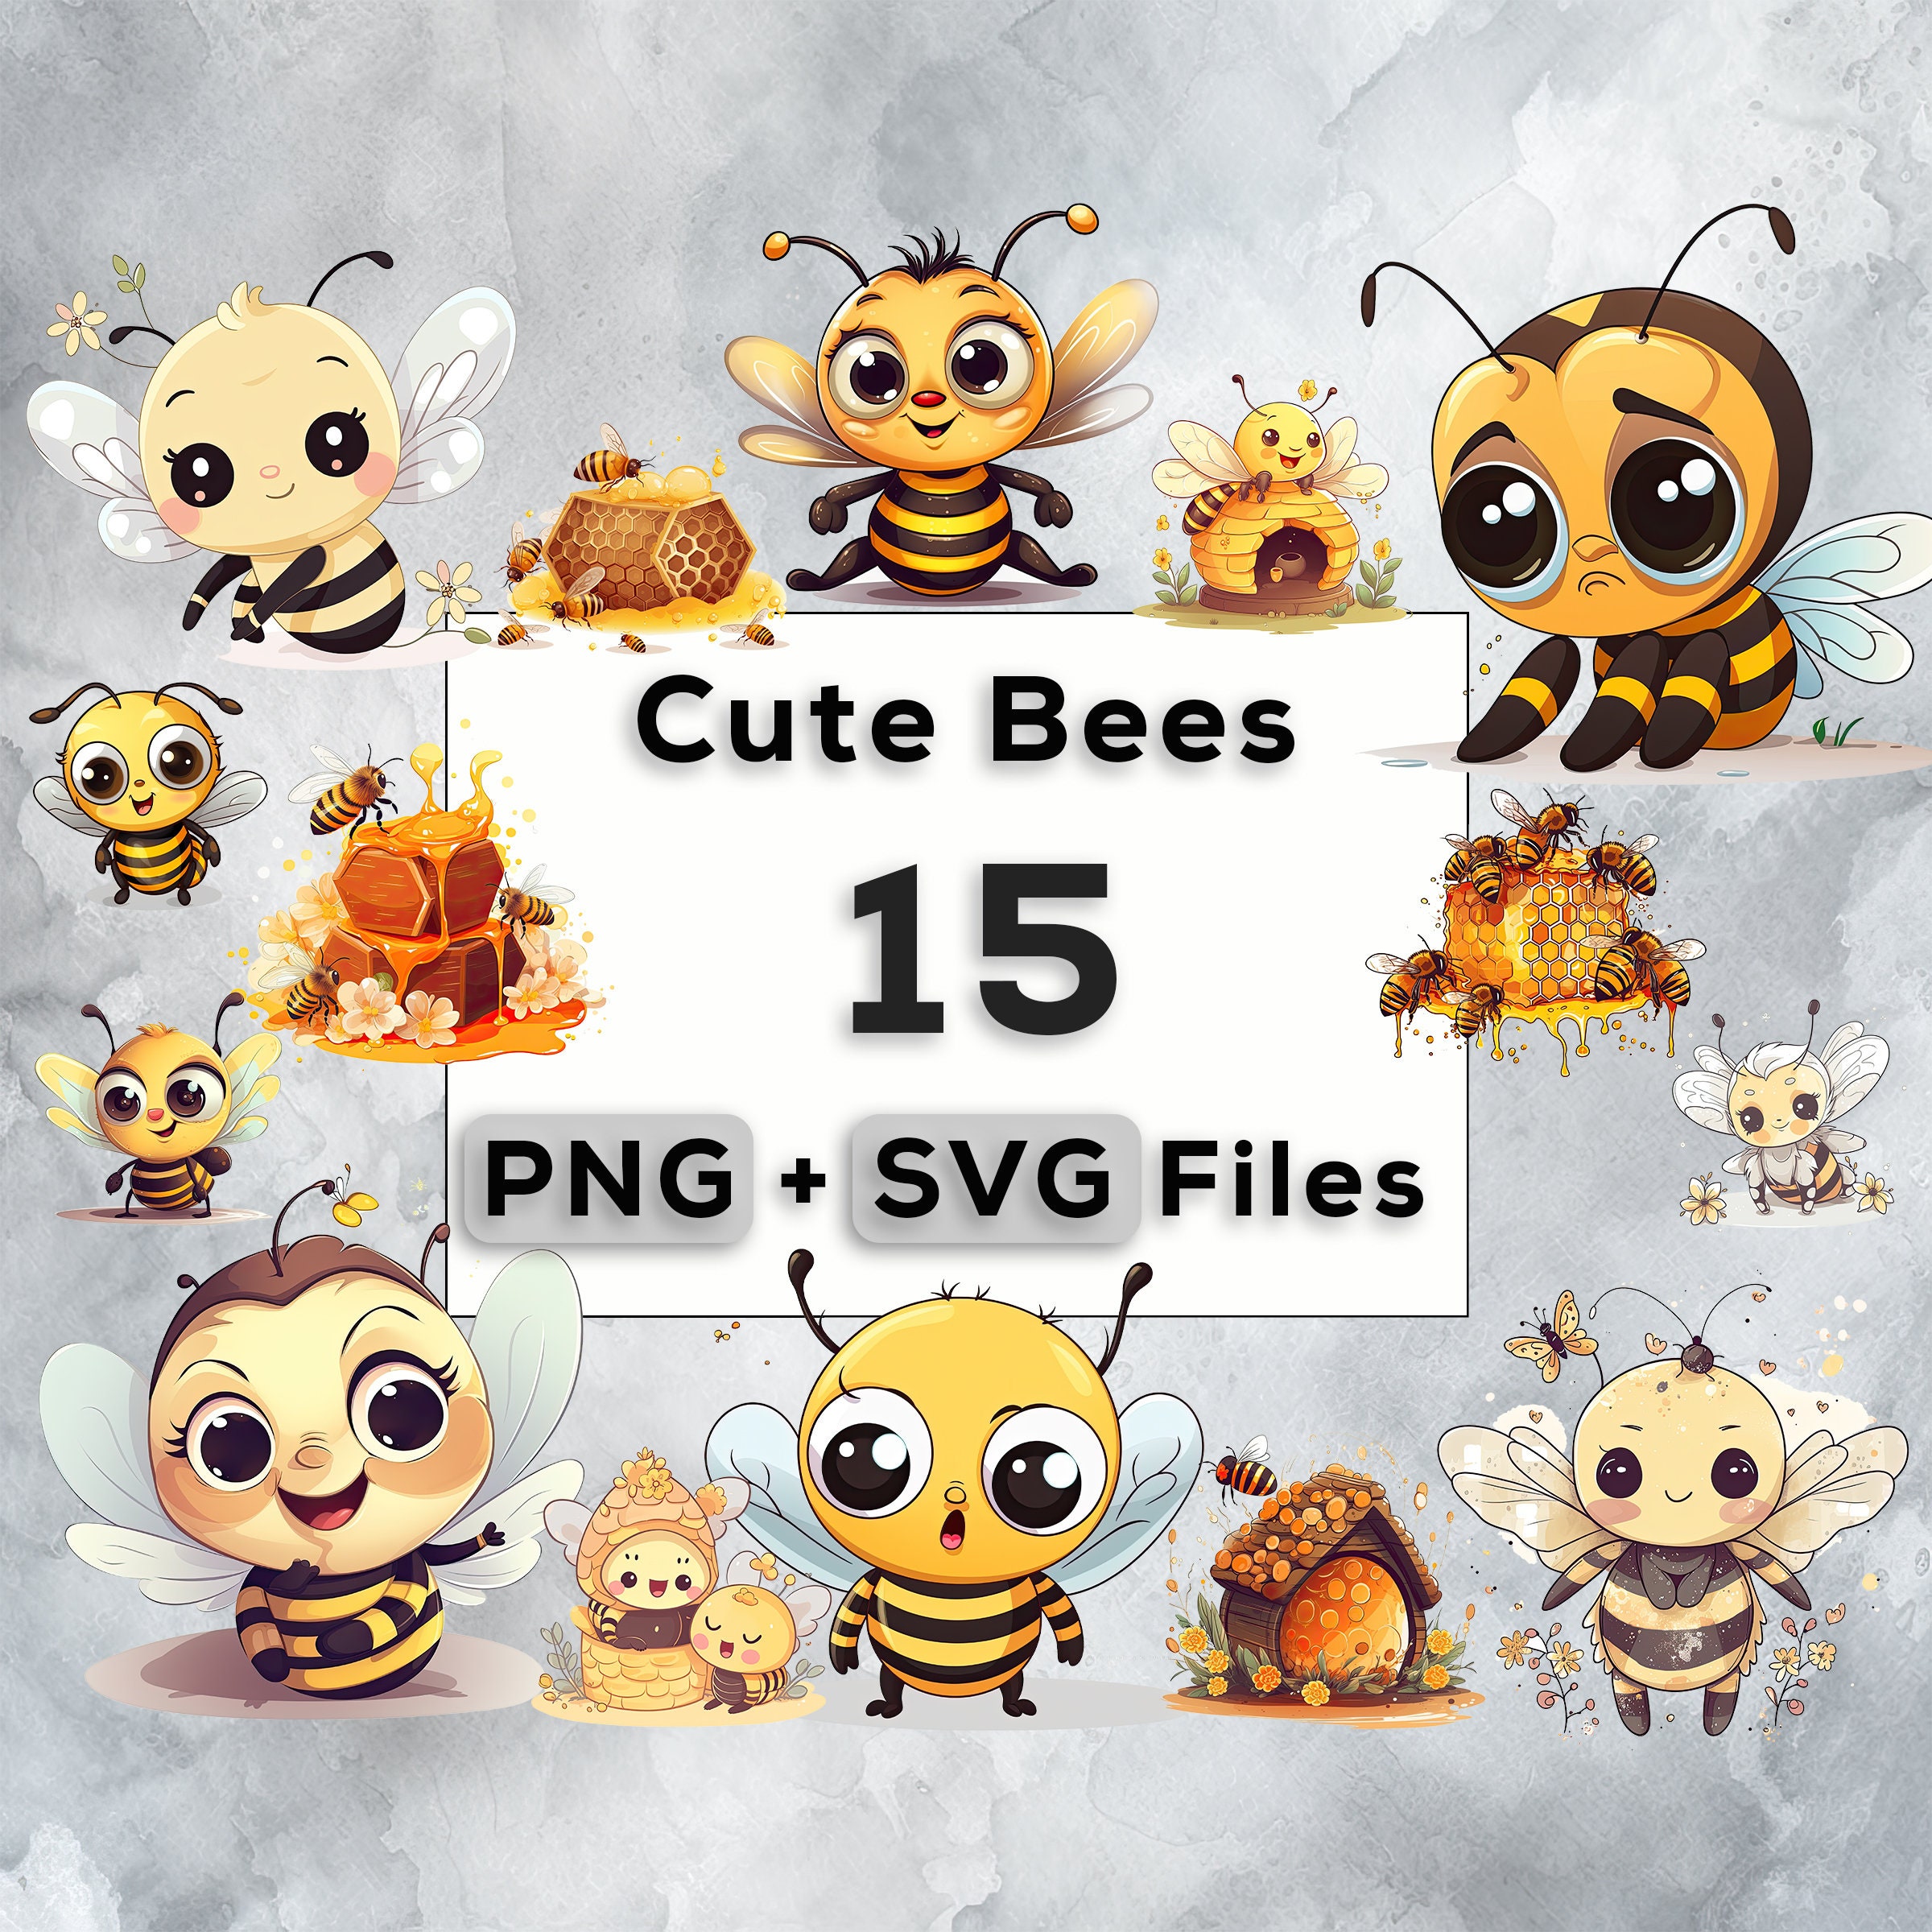 Cute bee clipart, bee png, baby bees, nursery bees, watercolor clipart,  watercolor bees, clipart, cartoon bees, transparent png, big eyes